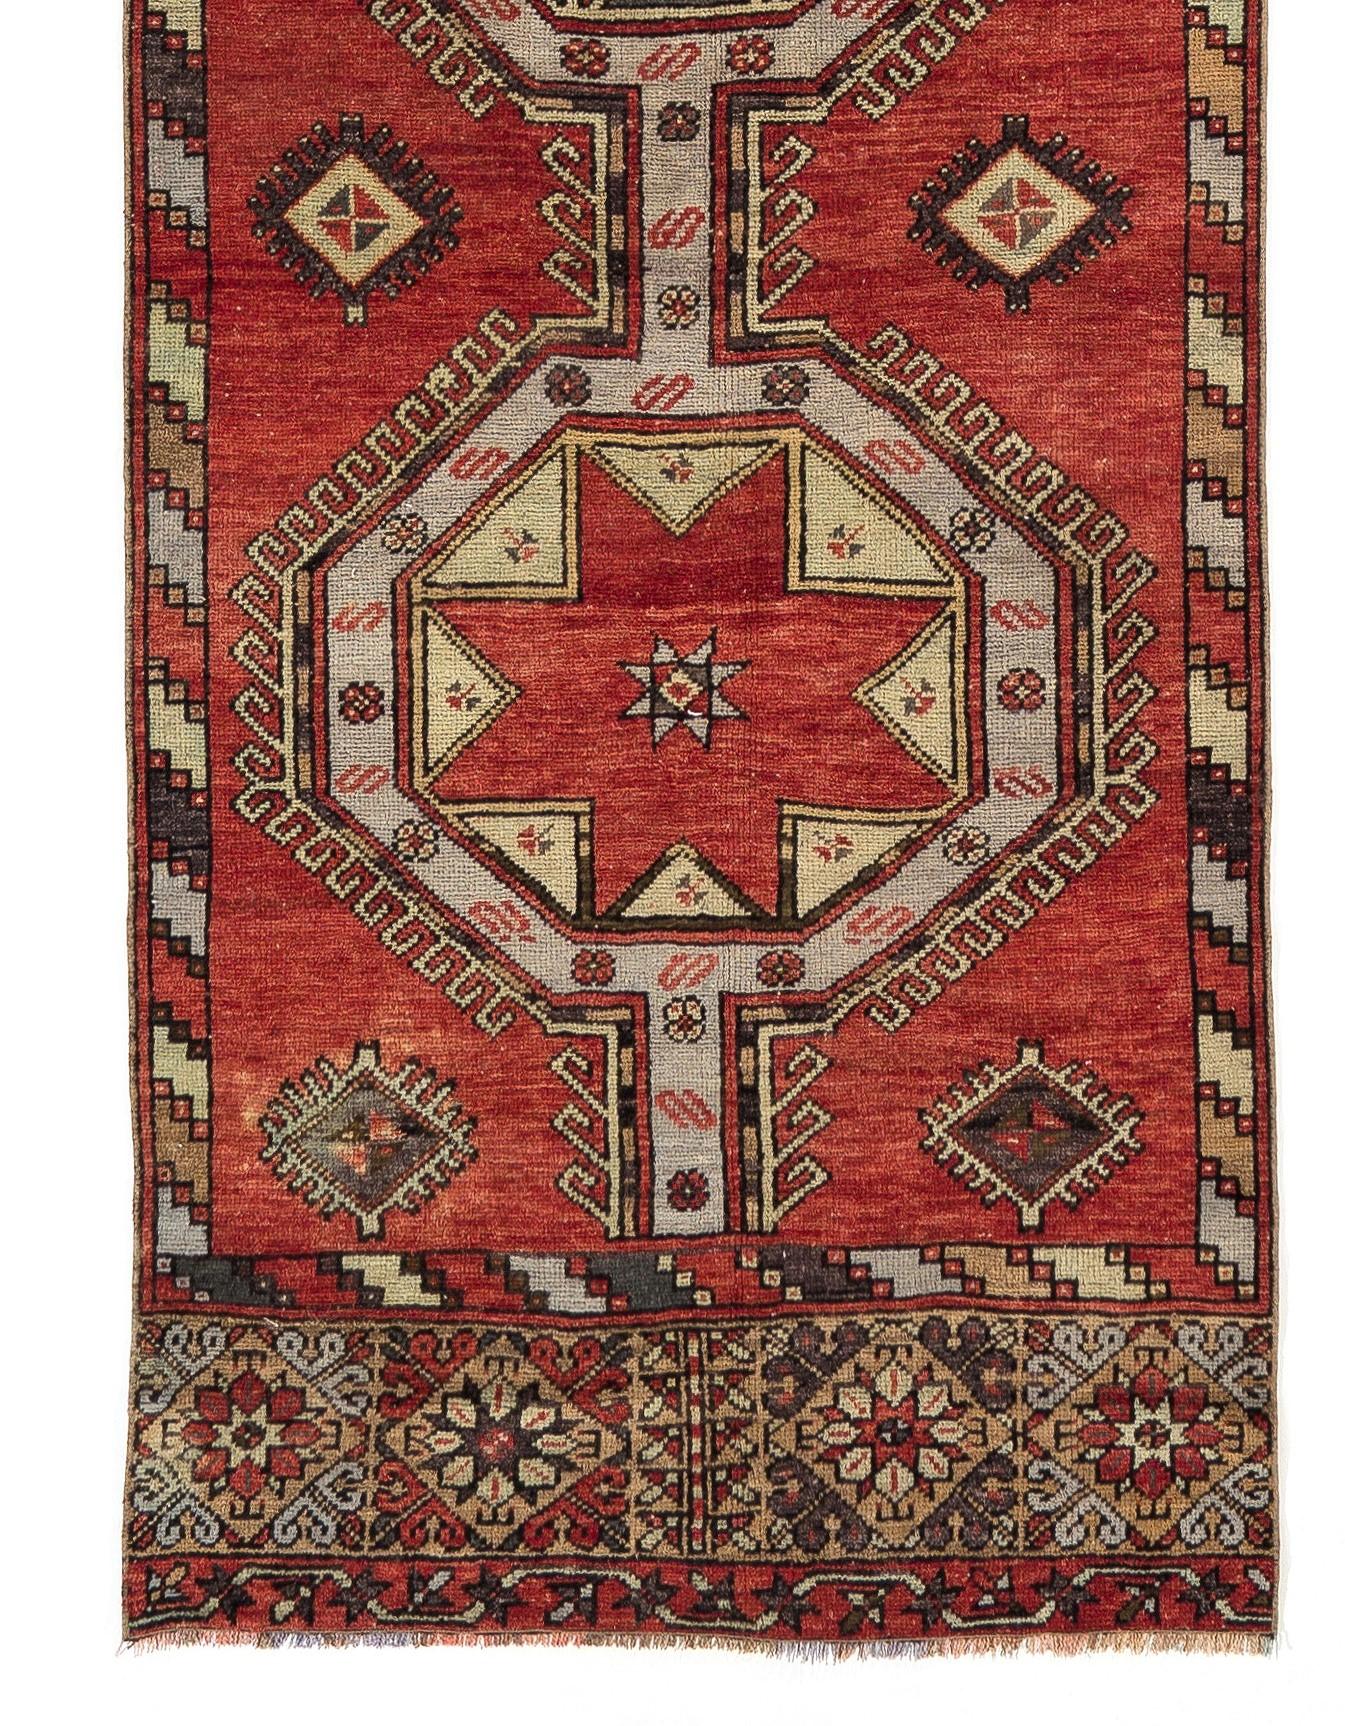 A 1950s hand-knotted runner rug from Central Turkey featuring an eye-catching geometric/star medallions design against a deep tomato red field and and elaborately decorated borders at the top and bottom ends. The rug has soft medium wool pile on